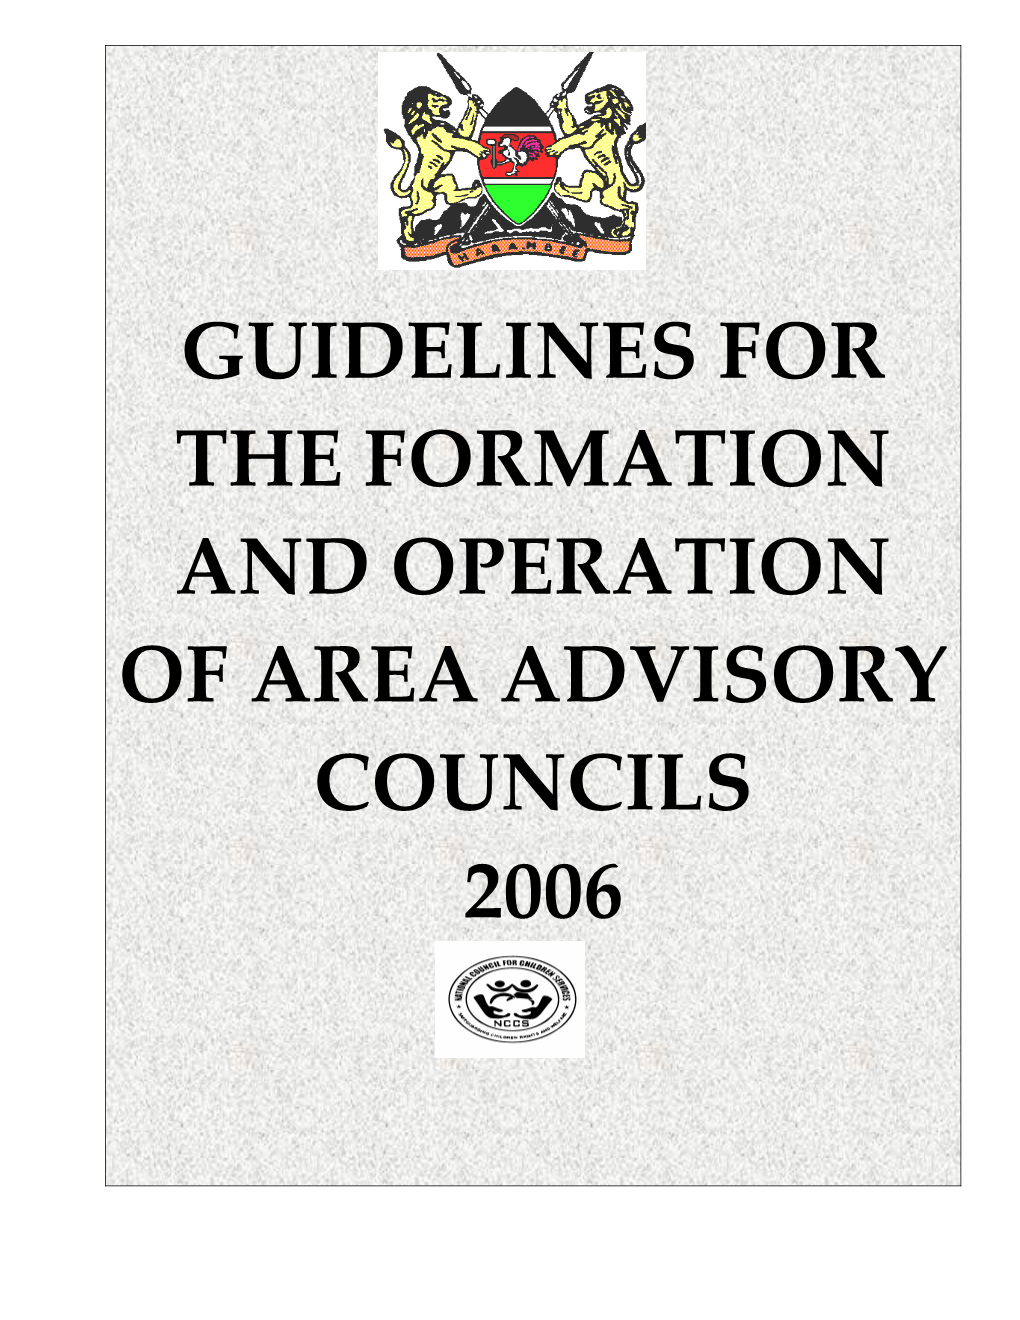 Guidelines for the Formation and Operation of Area Advisory Councils (Aacs) in Kenya